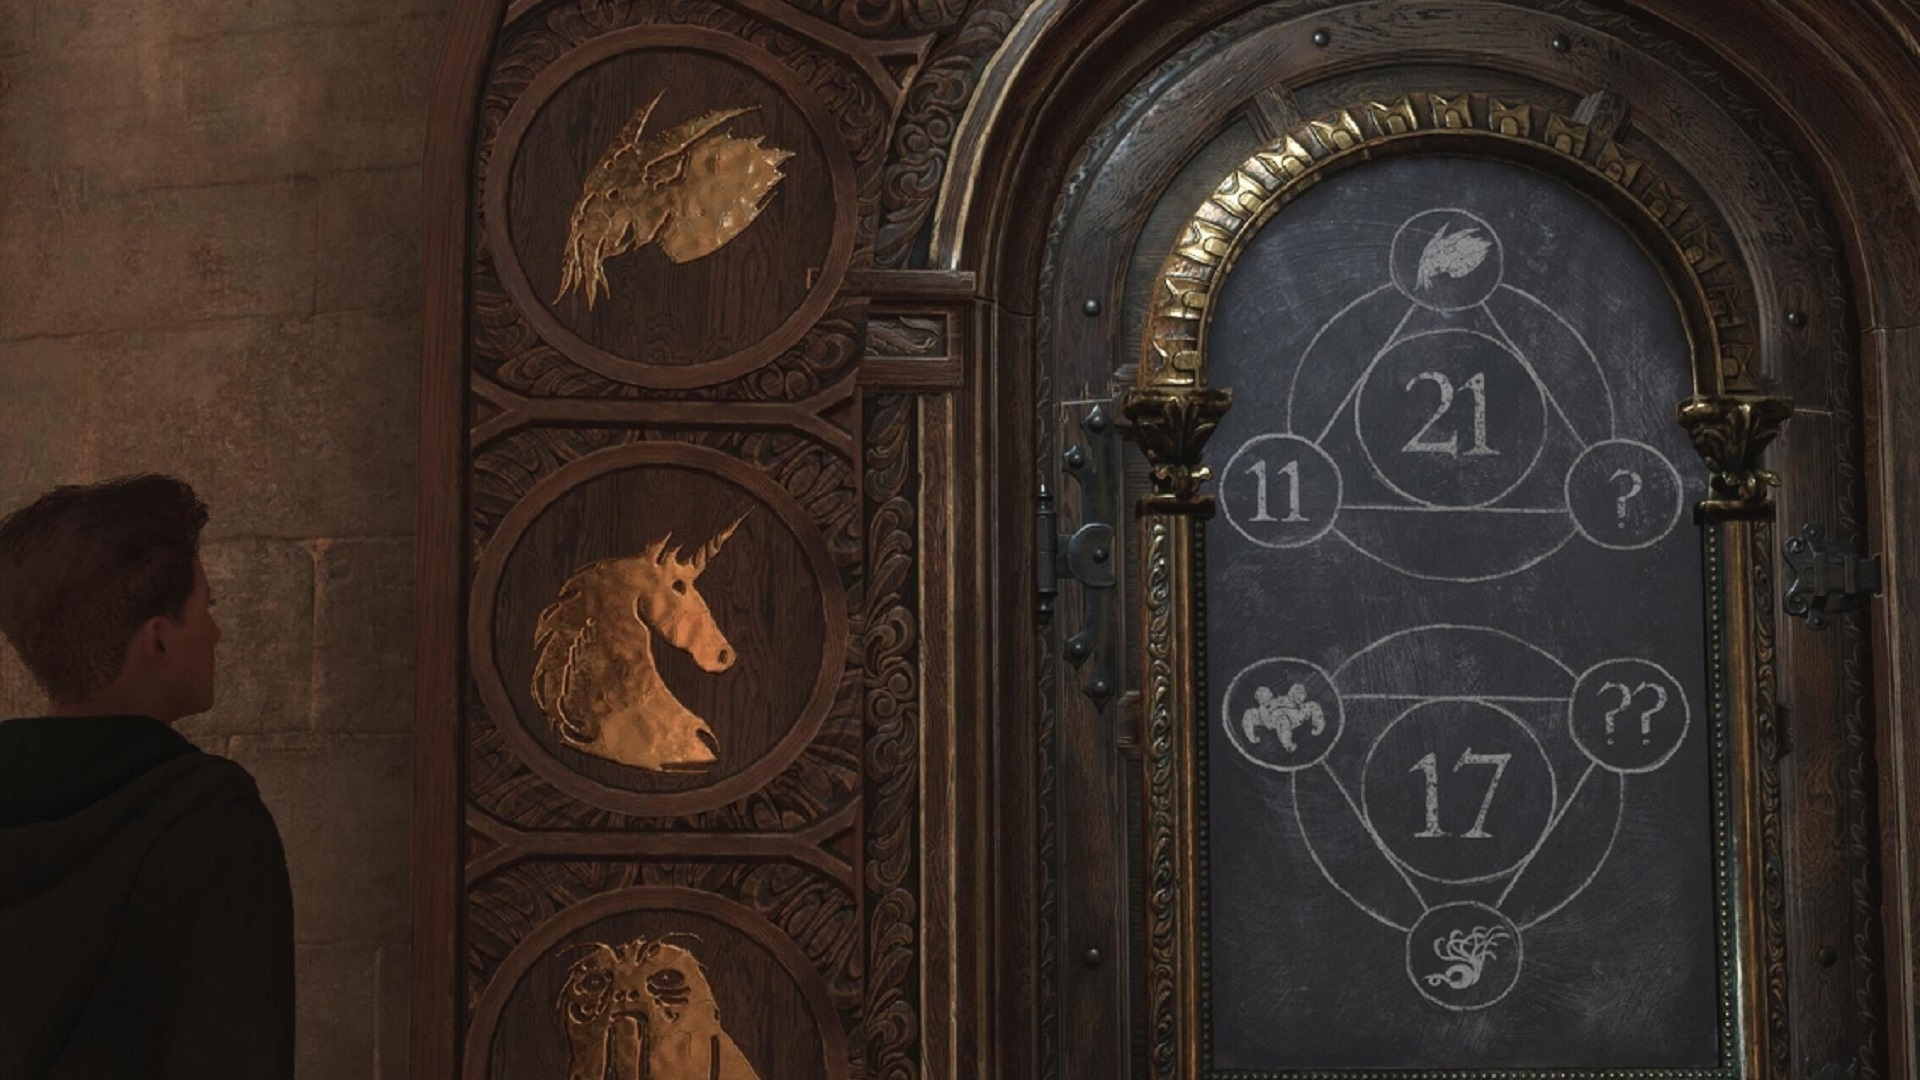 Hogwarts Legacy door puzzle guide: How to easily unlock the symbol